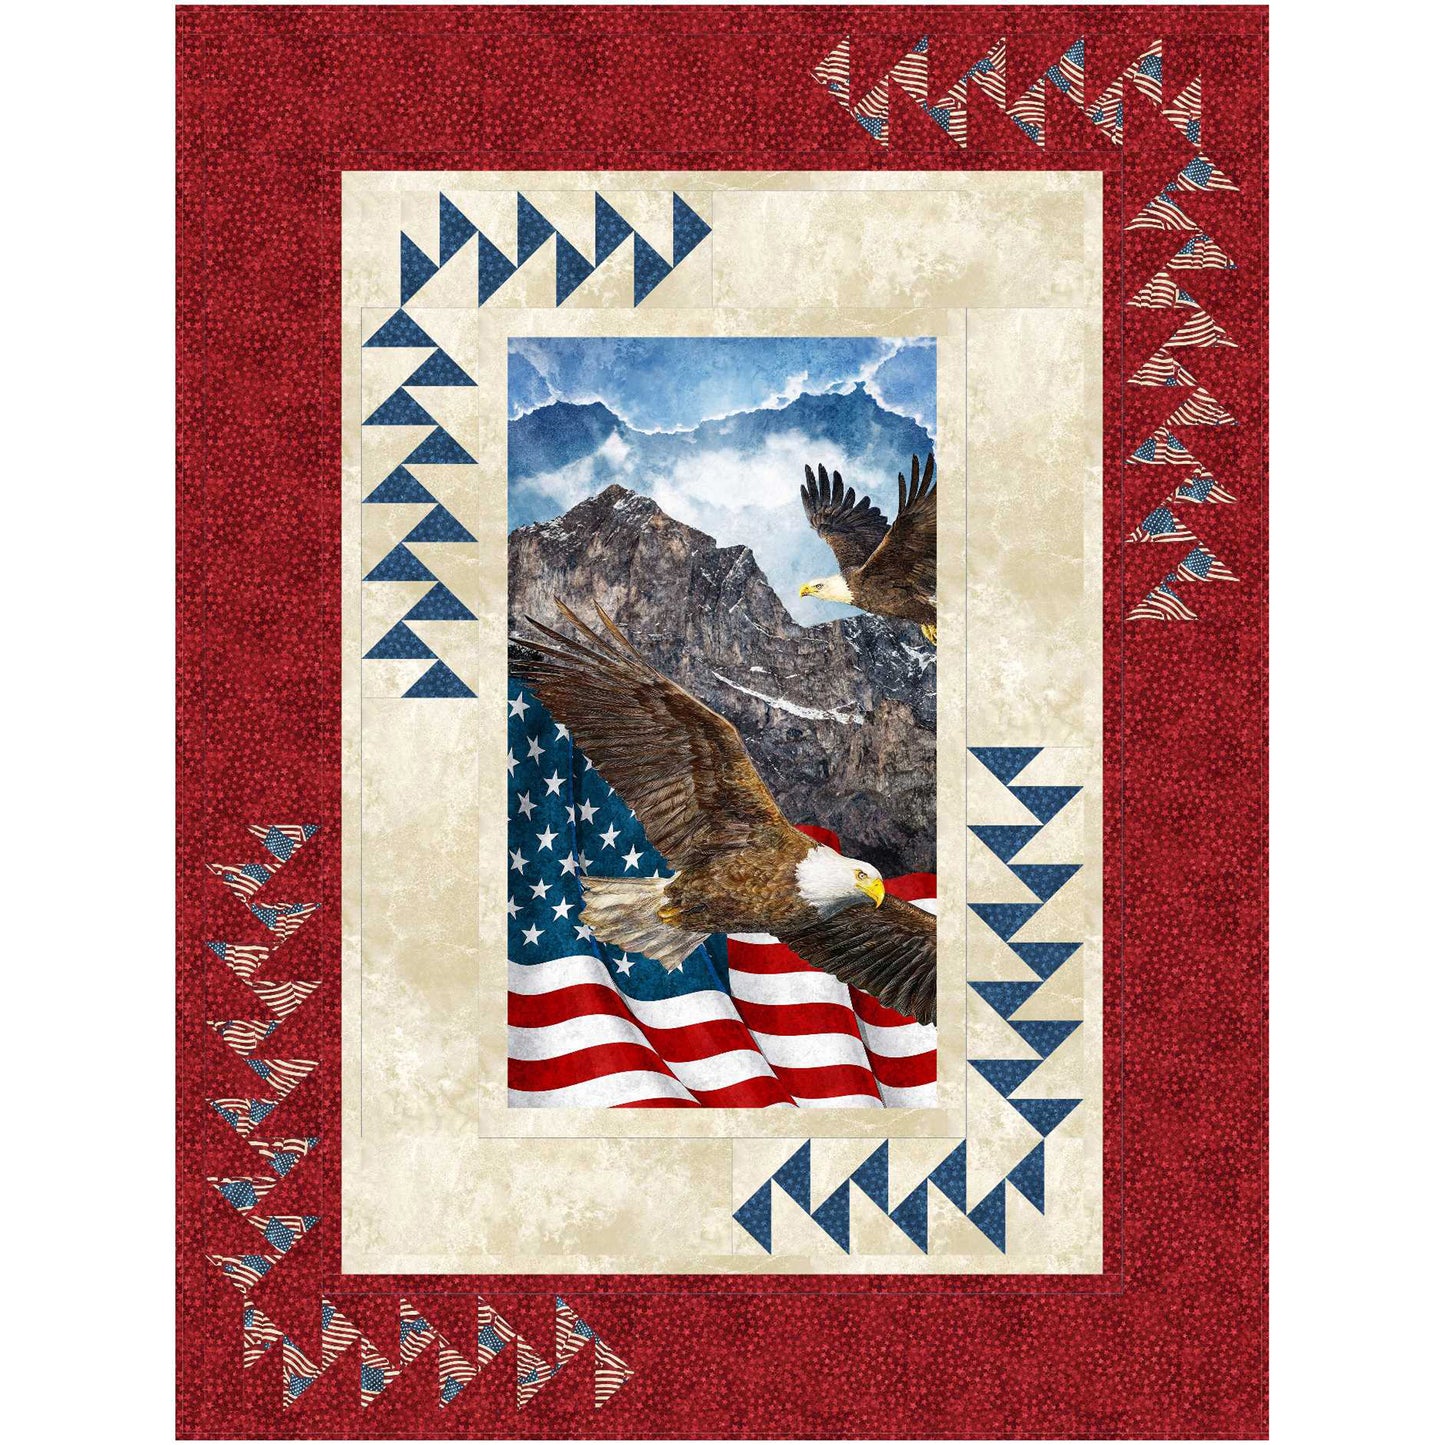 Eagle and American flag quilt featuring patriotic design with red, white, and blue colors and fun triangles pattern on both borders giving it a fun look.